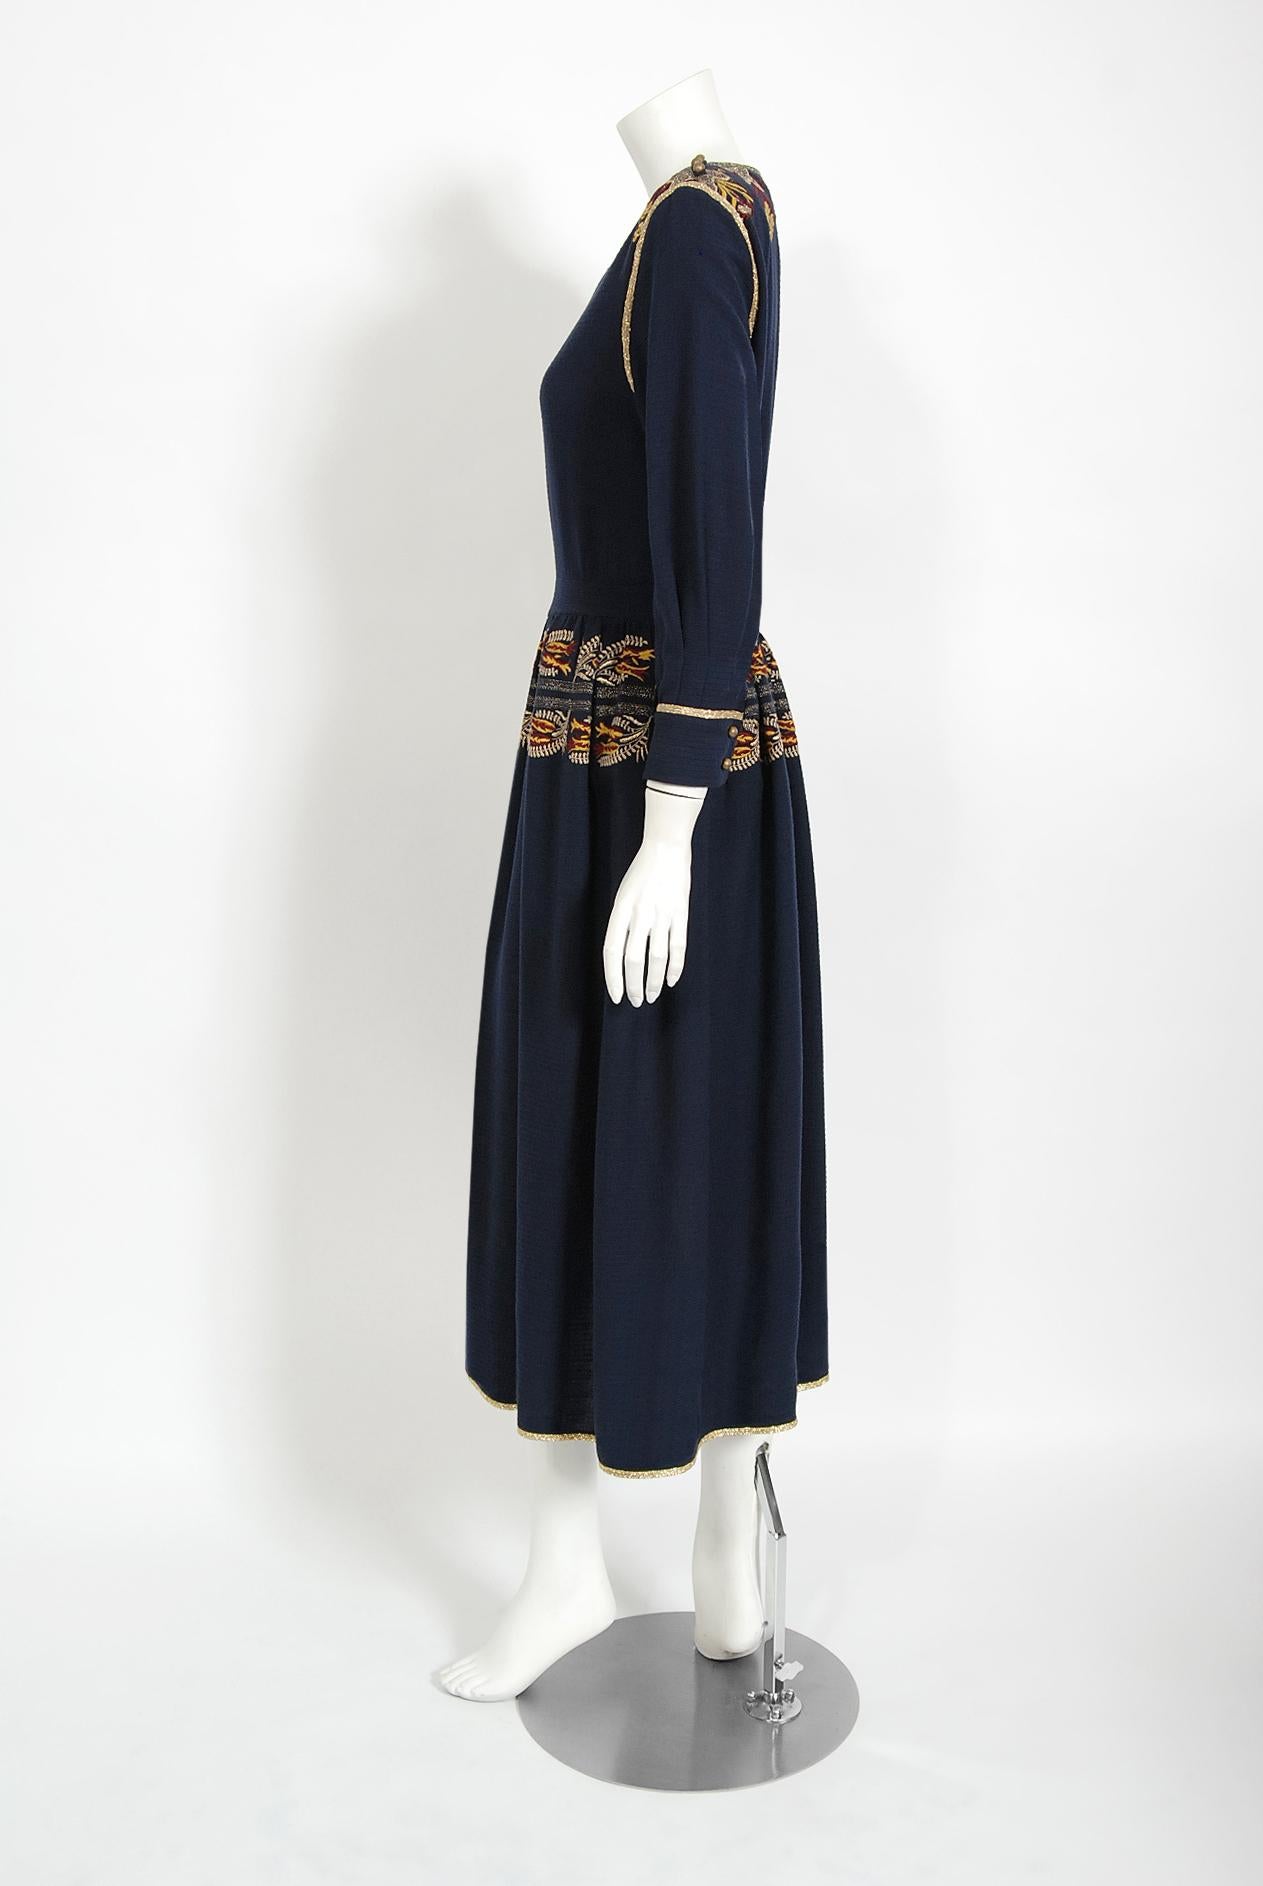 Vintage 1979 Karl Lagerfeld for Chloe Navy Blue Metallic Embroidered Knit Dress 2